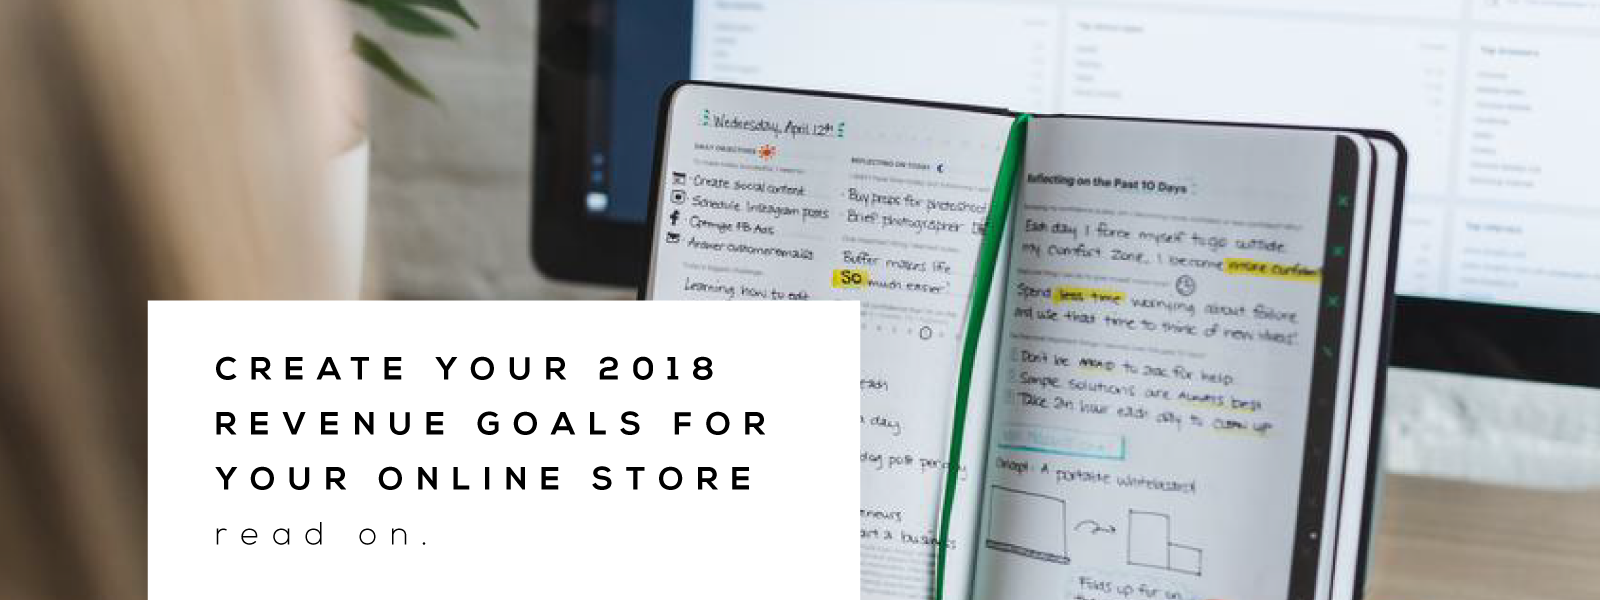 how to make revenue goals for your online store